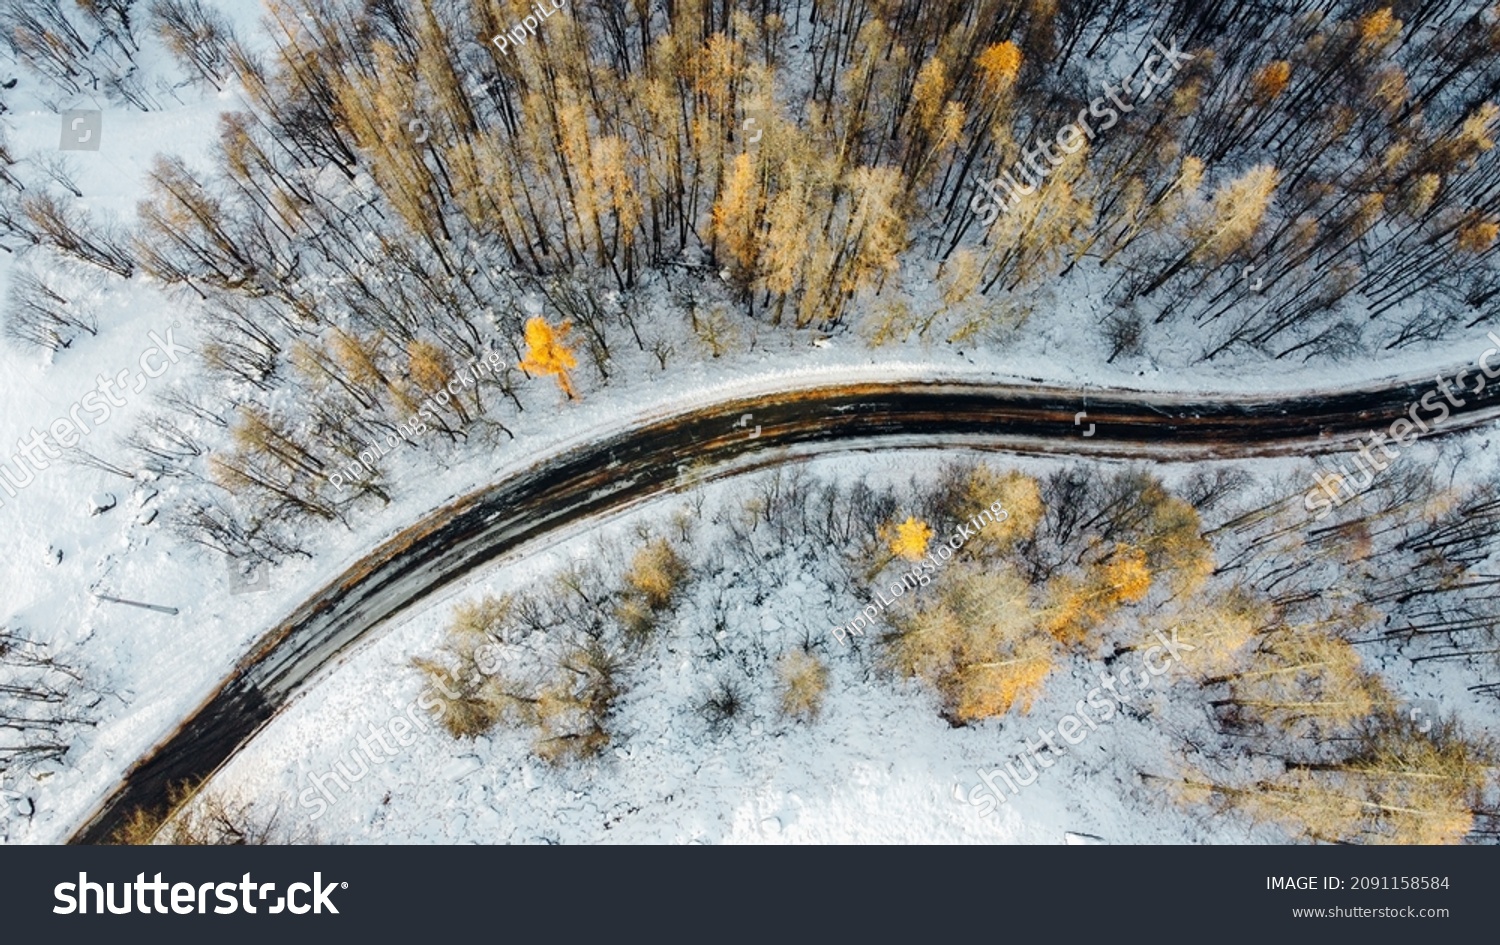 Aerial high angle view of narrow winding curvy mountain road among the trees in winter forest. Snowy landscape, bird's eye view. #2091158584